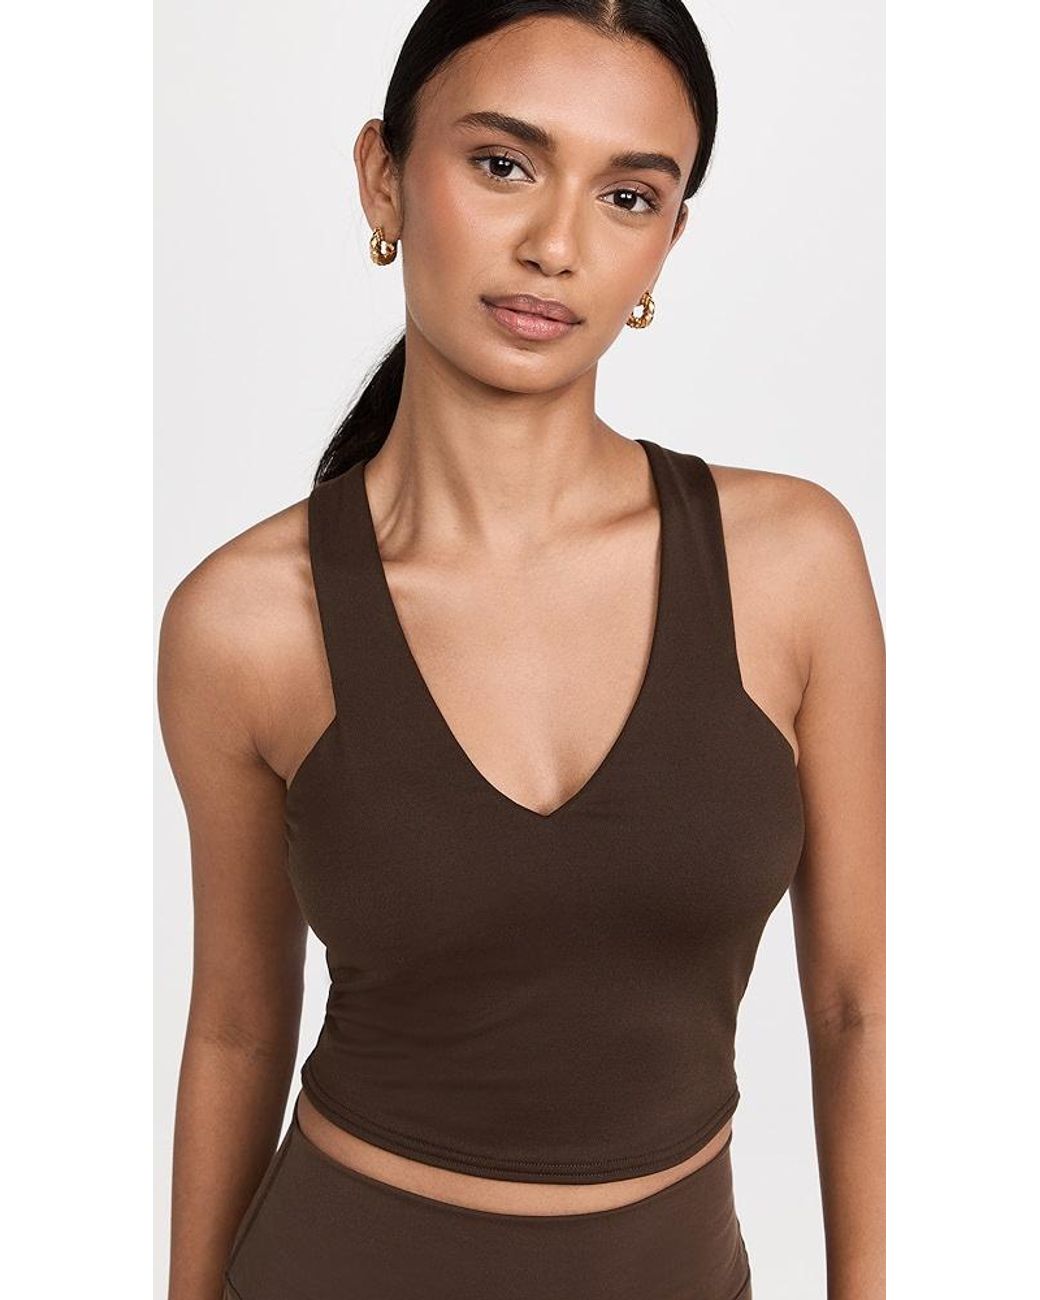 ALO YOGA Aspire cropped ribbed cotton-blend jersey tank